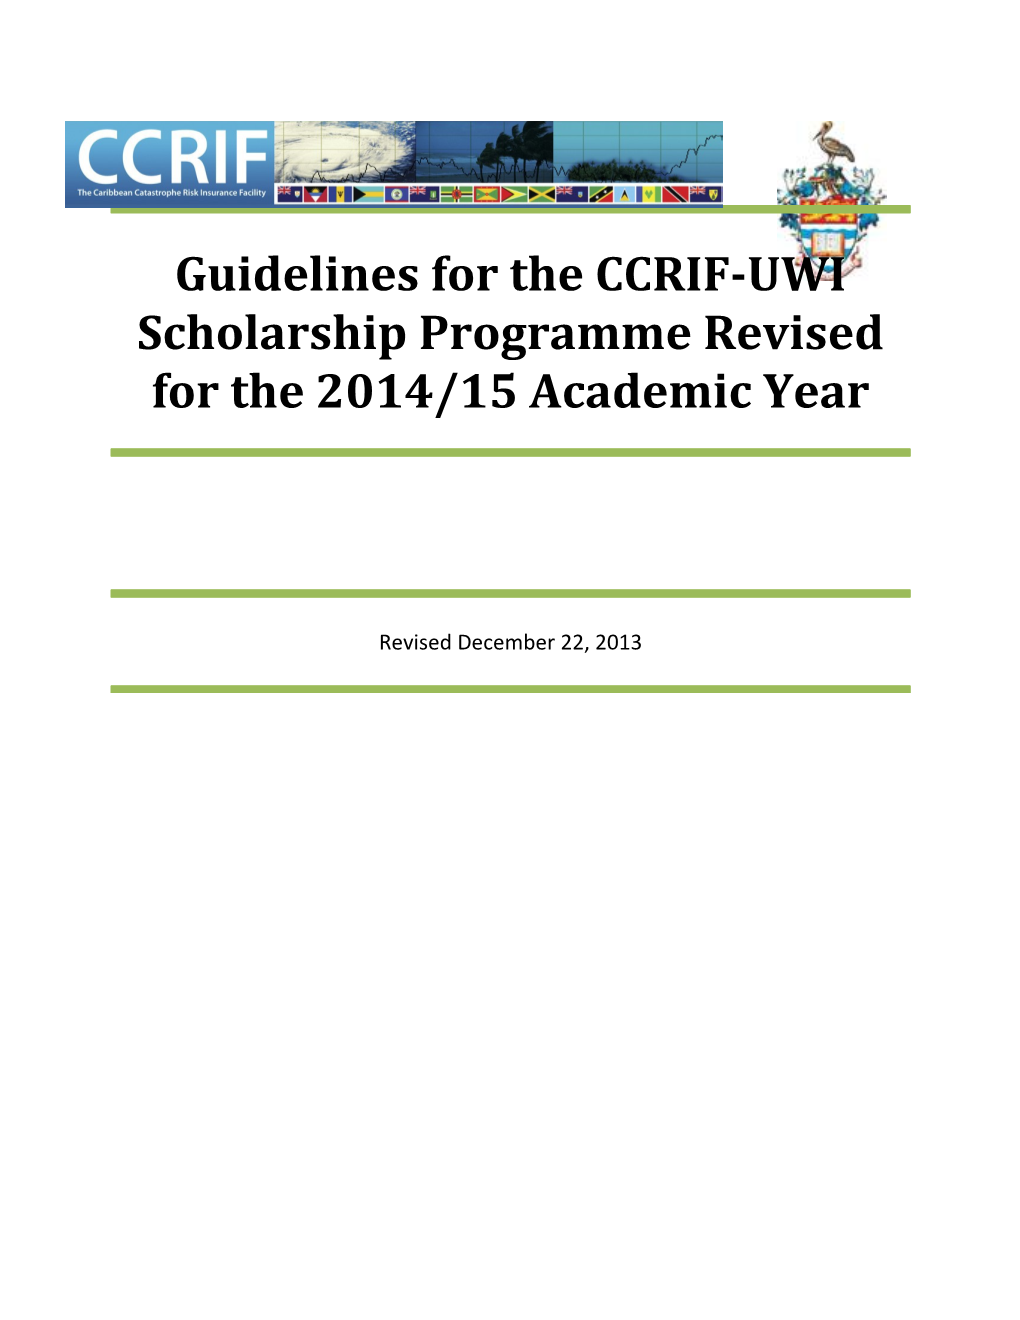 Guidelines for the CCRIF-UWI Scholarship Programme Revised for the 2014/15 Academic Year